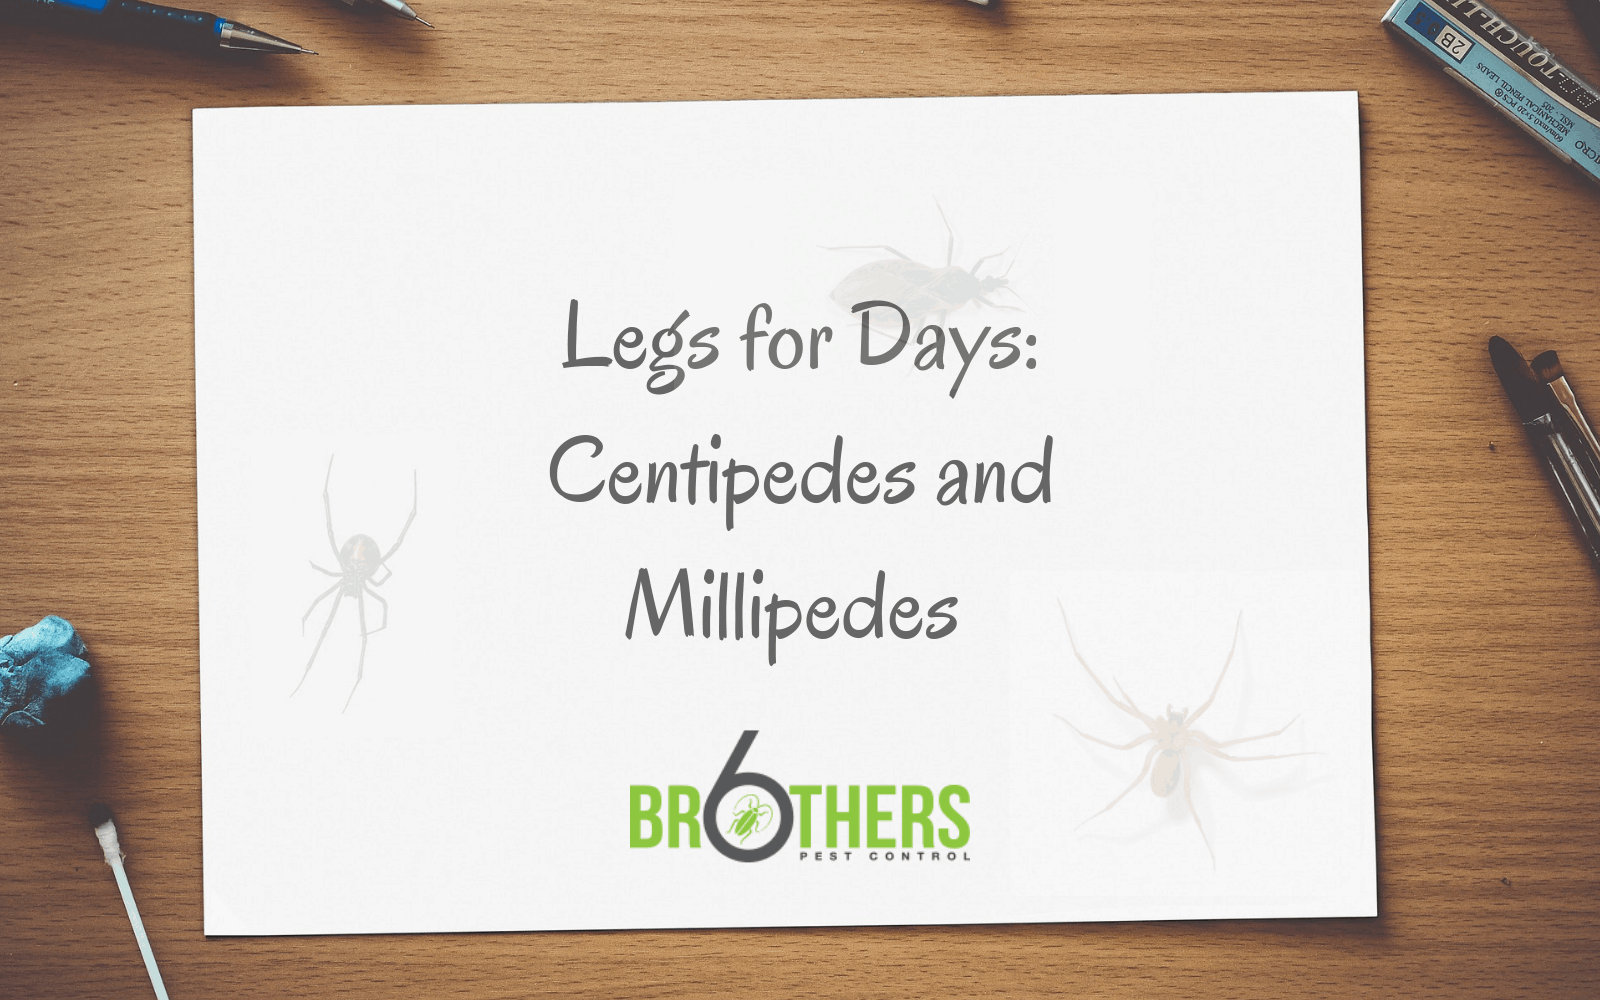 Legs for Days: Centipedes and Millipedes